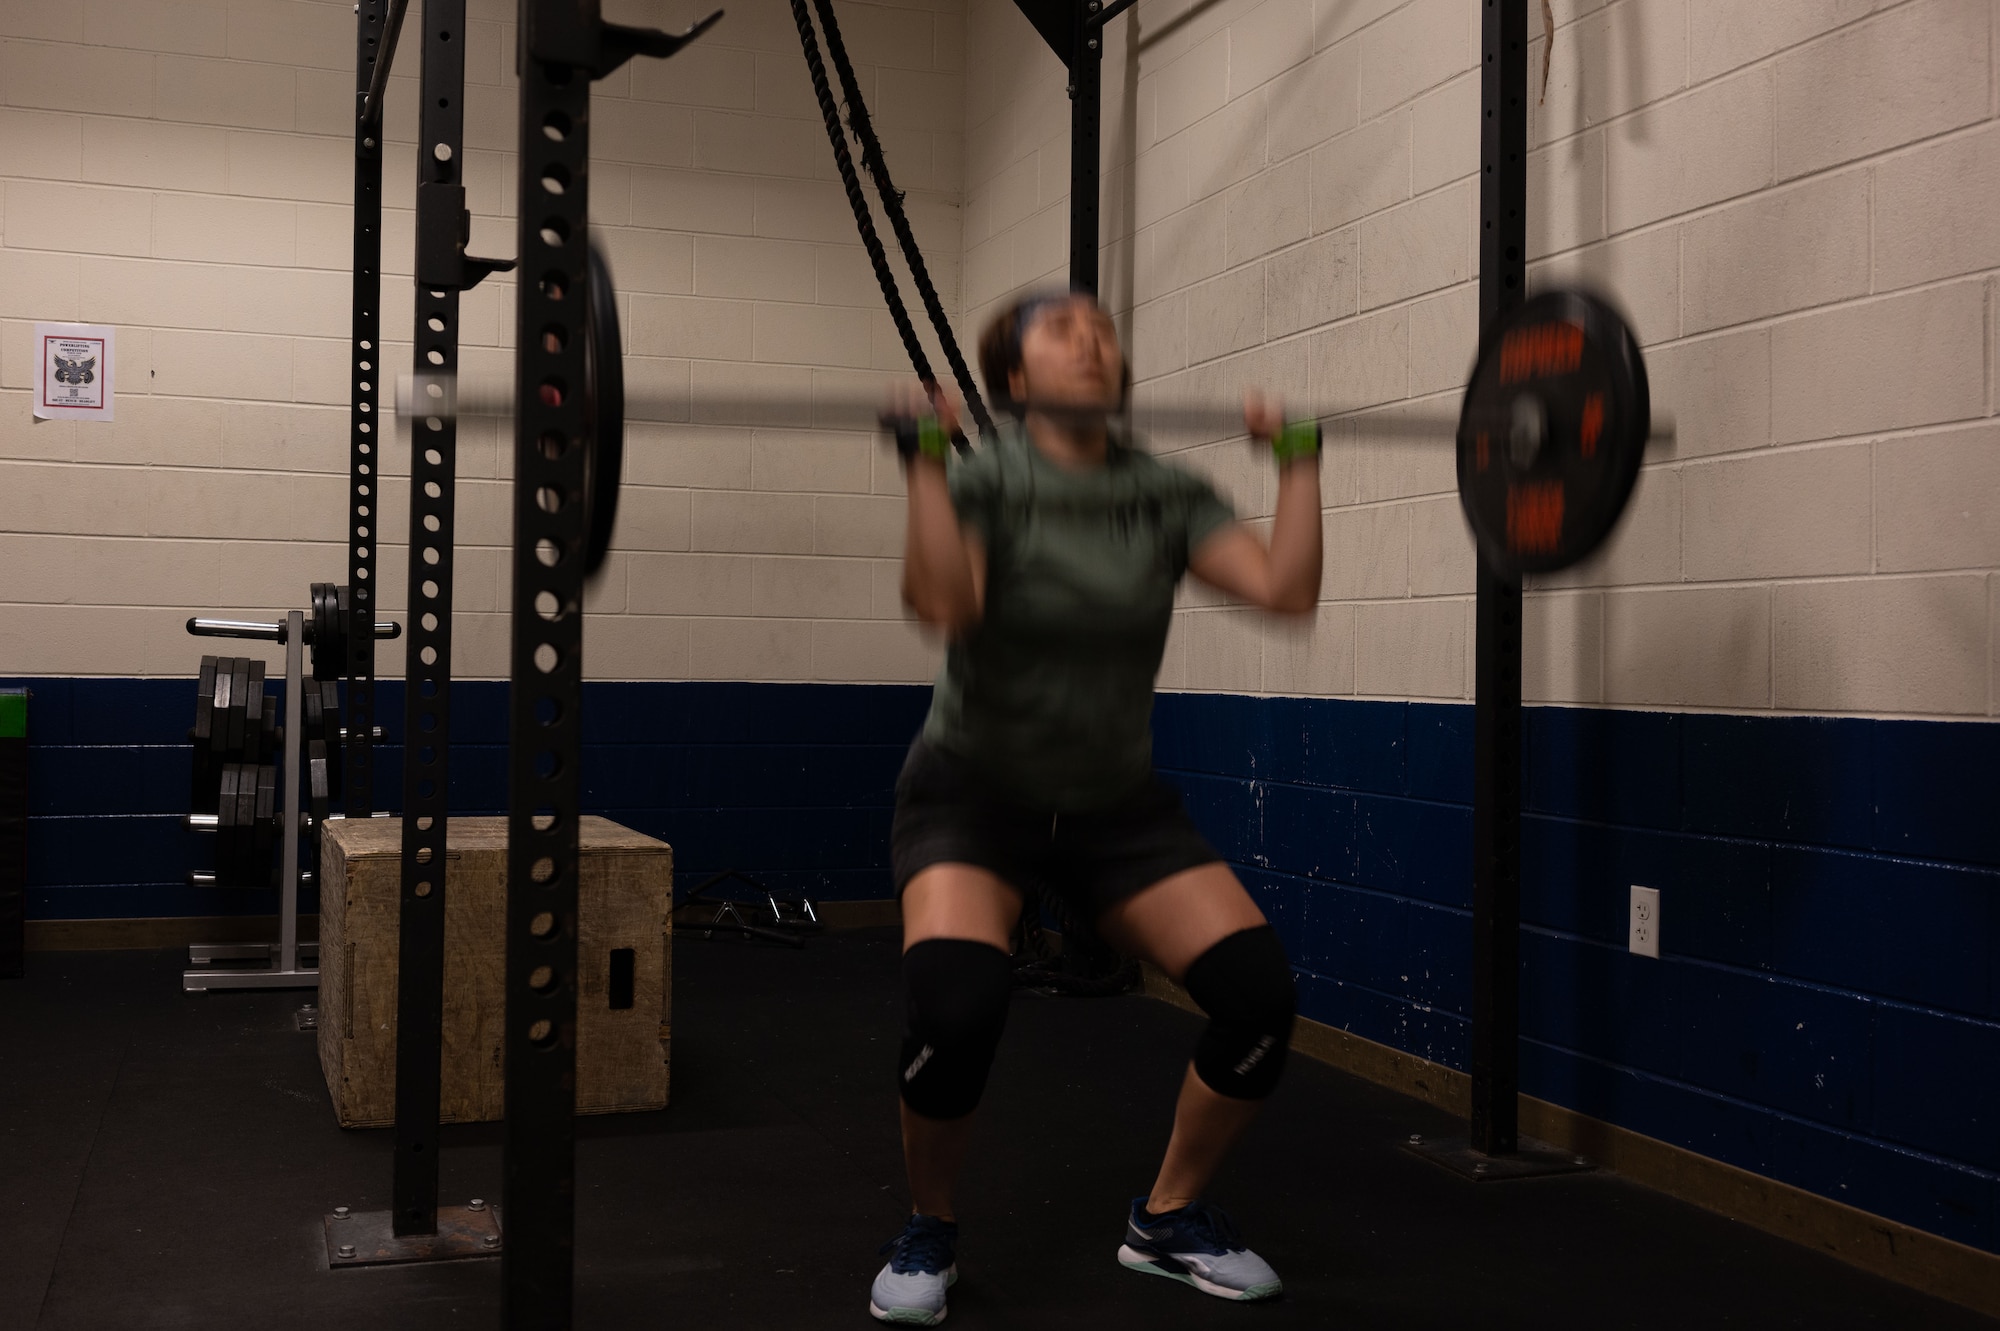 U.S. Air Force Tech. Sgt. Carolina Rodriquez, 512th Airlift Wing loadmaster, performs a thruster during a CrossFit class at Dover Air Force Base, Delaware, March 14, 2024. The Dover AFB Fitness Center CrossFit class is an ongoing program open to all active duty, reserve, spouses and Department of Defense card holders. (U.S. Air Force photo by Airman 1st Class Dieondiere Jefferies)